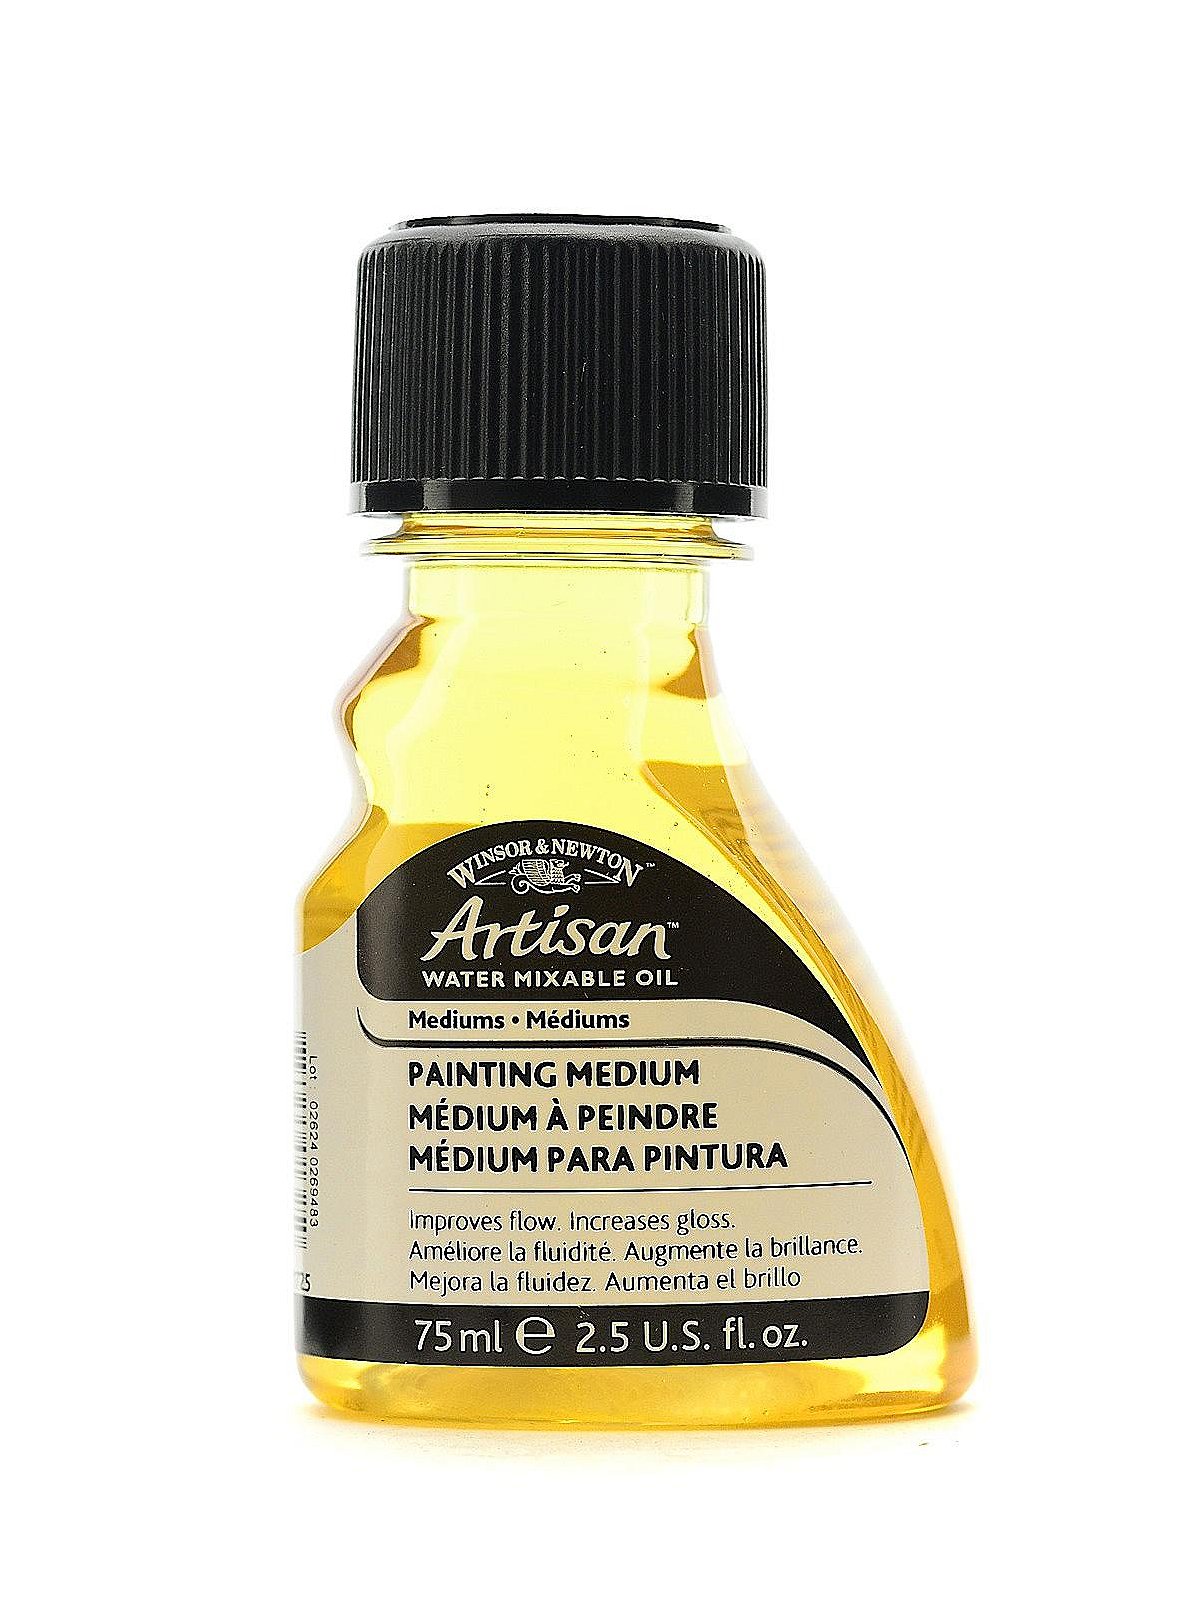 Artisan Water Mixable Oil